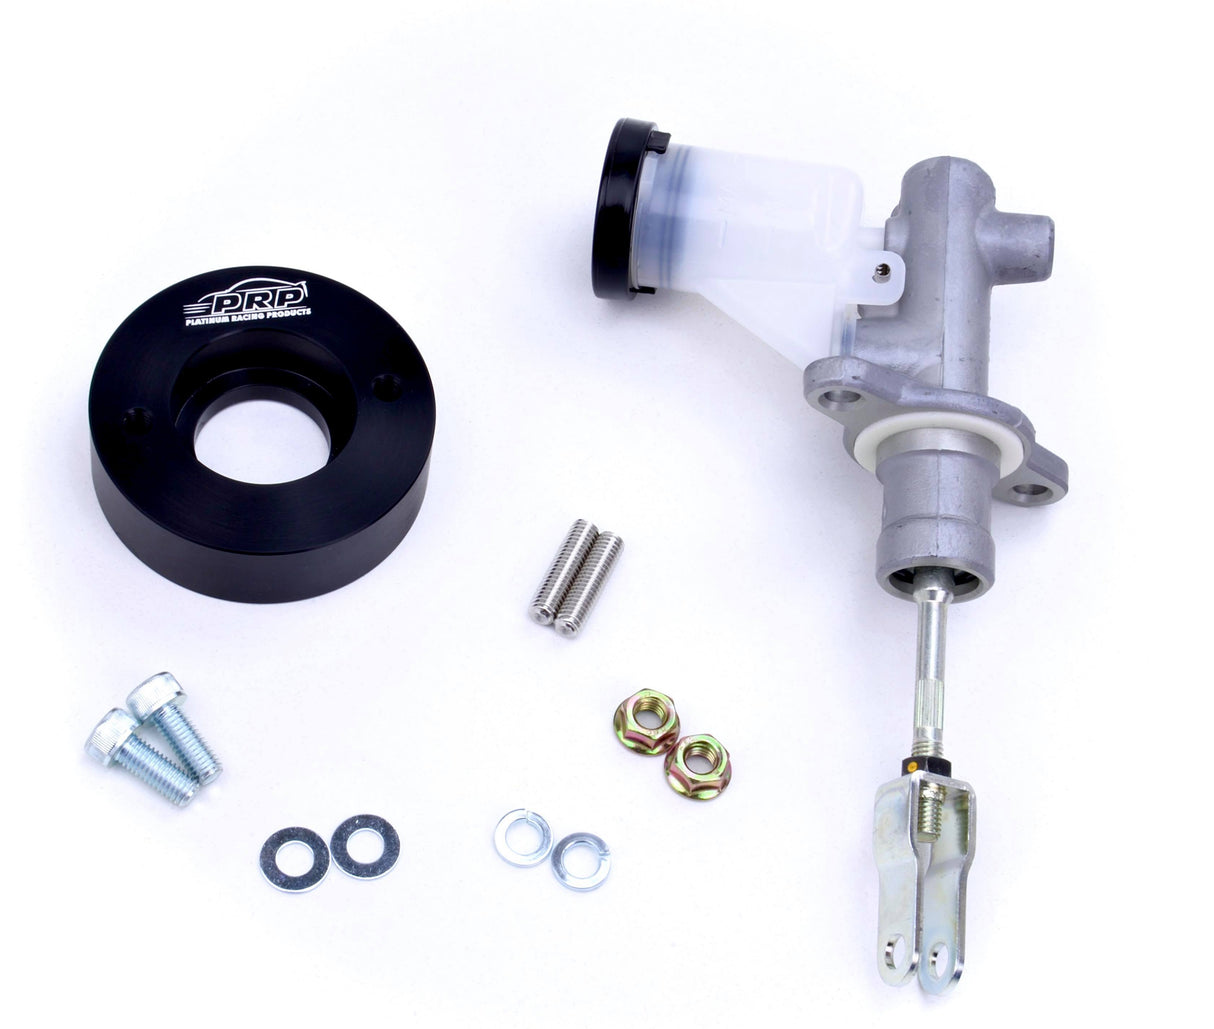 Platinum Racing Products - Nissan Skyline Clutch Booster Delete